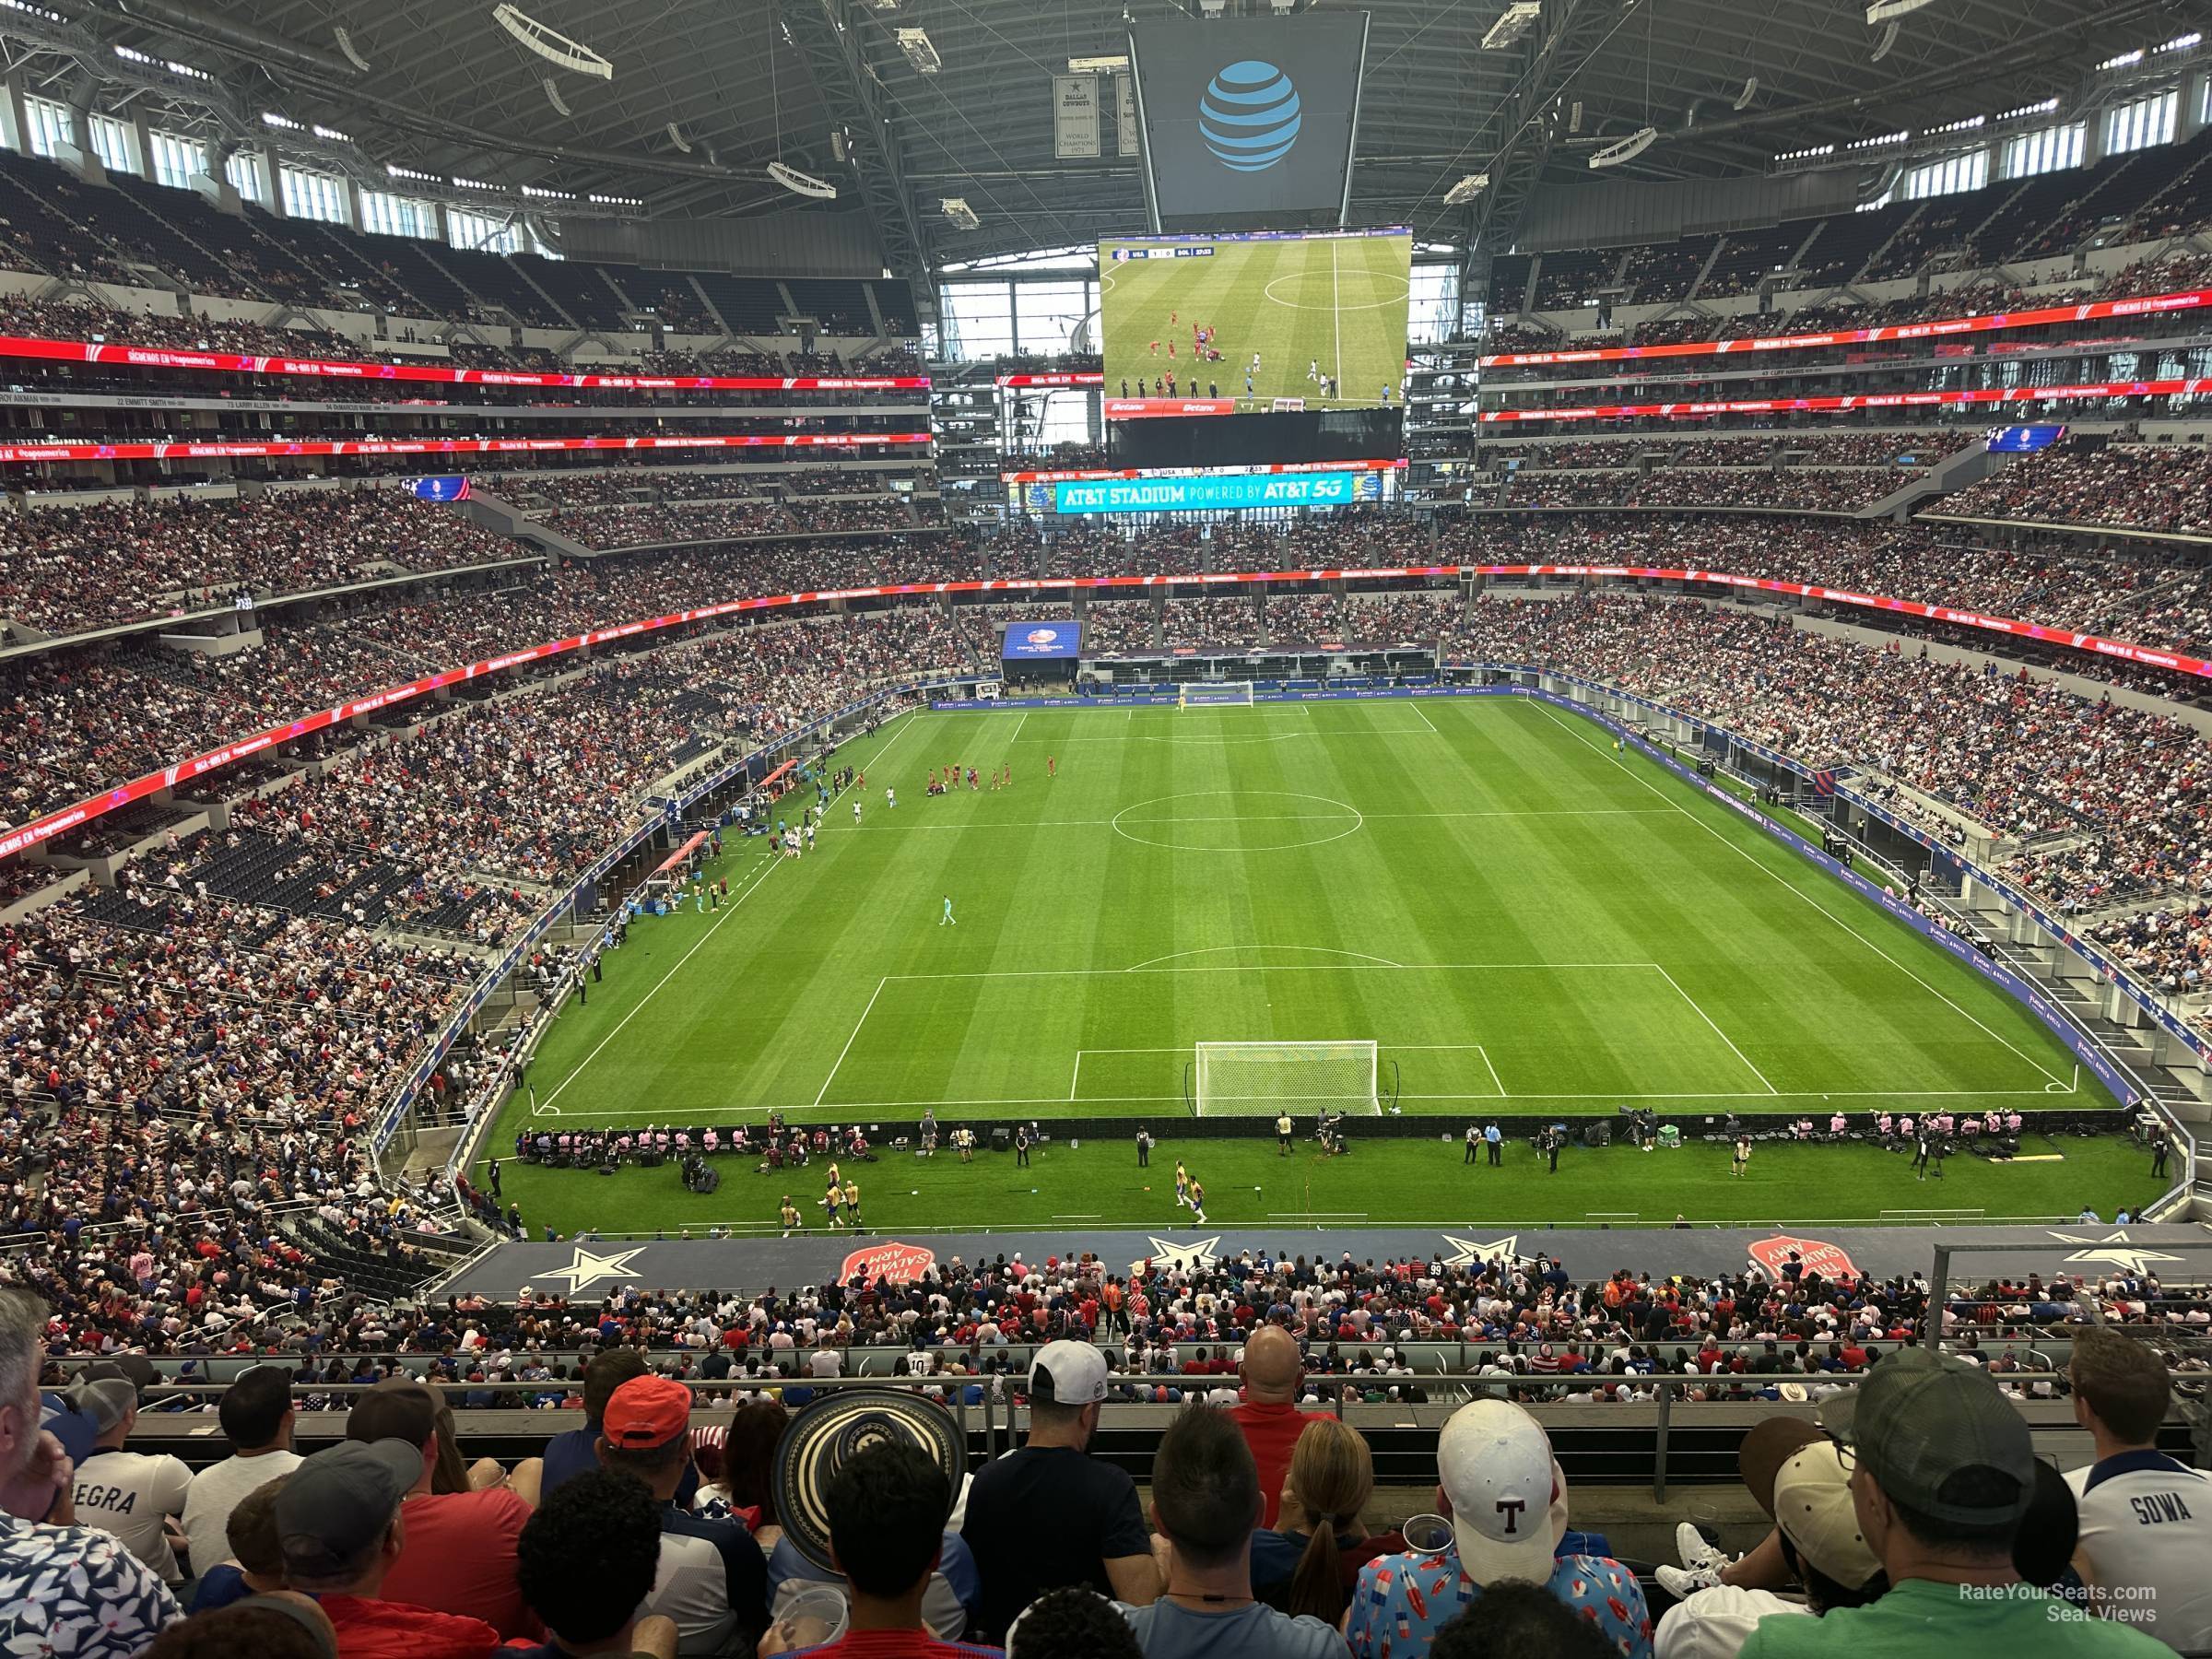 section 324, row 5 seat view  for soccer - at&t stadium (cowboys stadium)